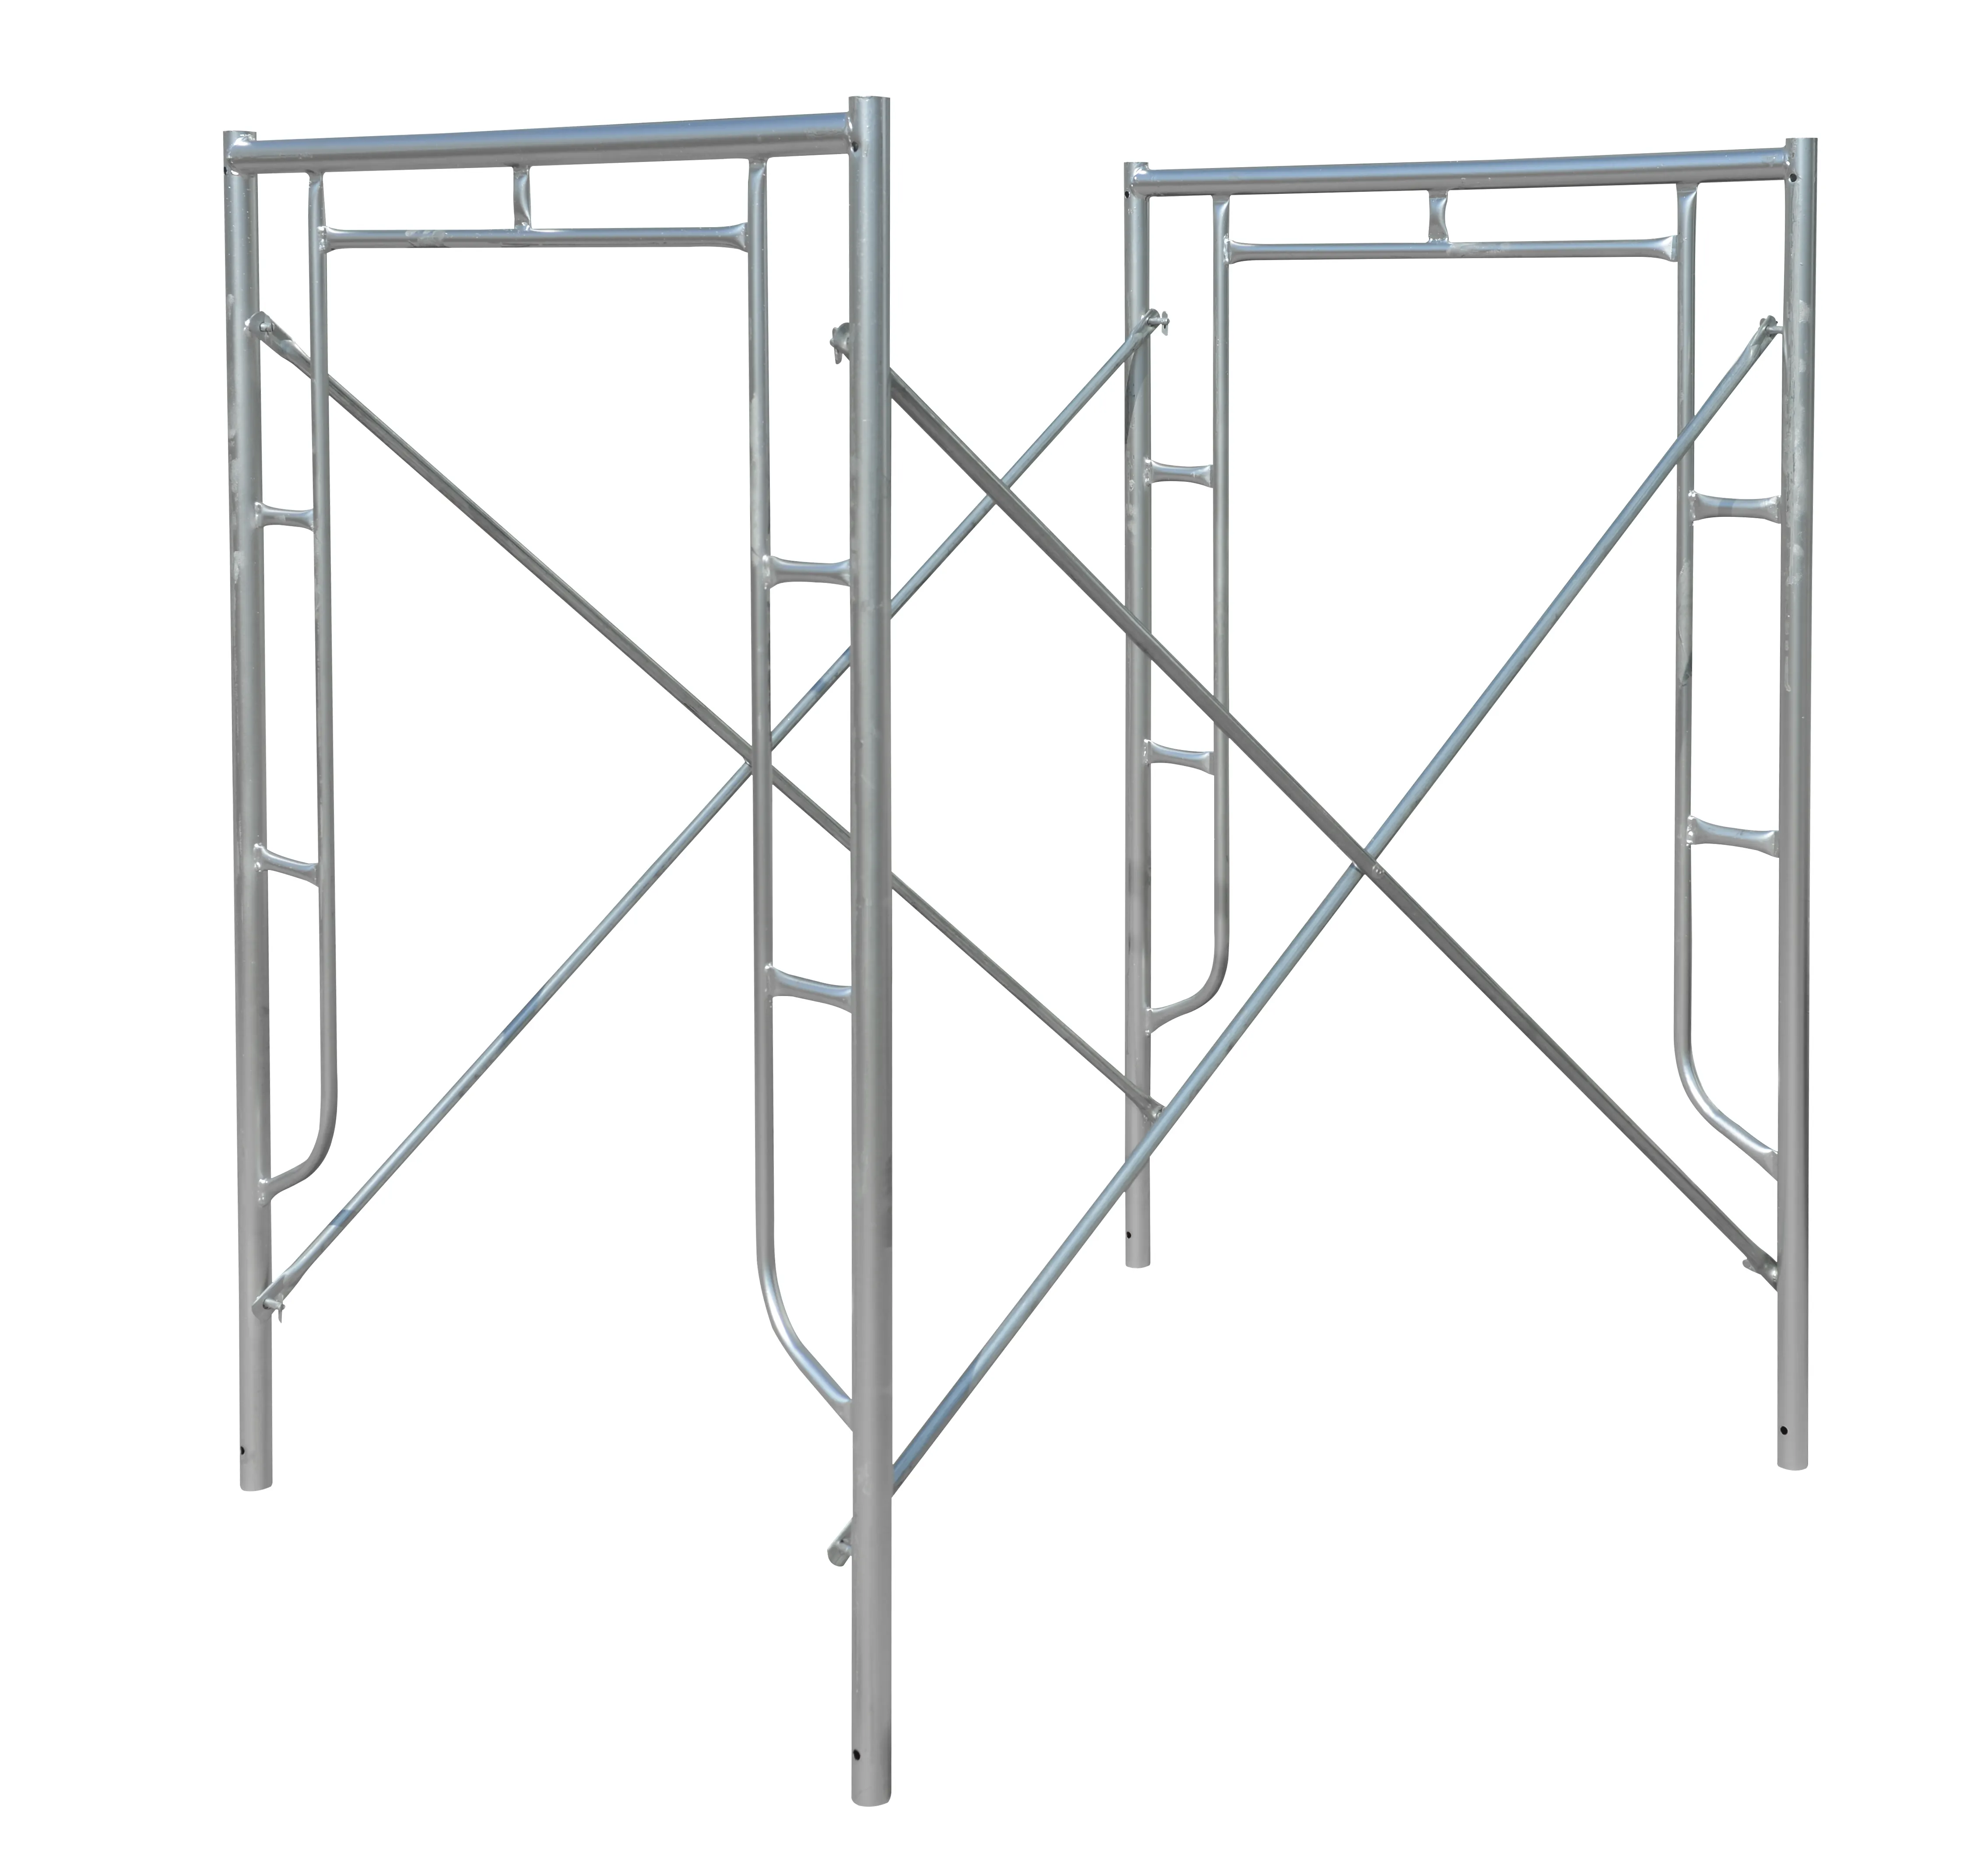 TIanjin Building Construction Steel Ladder Frame Scaffolding For Sale construction factory price list